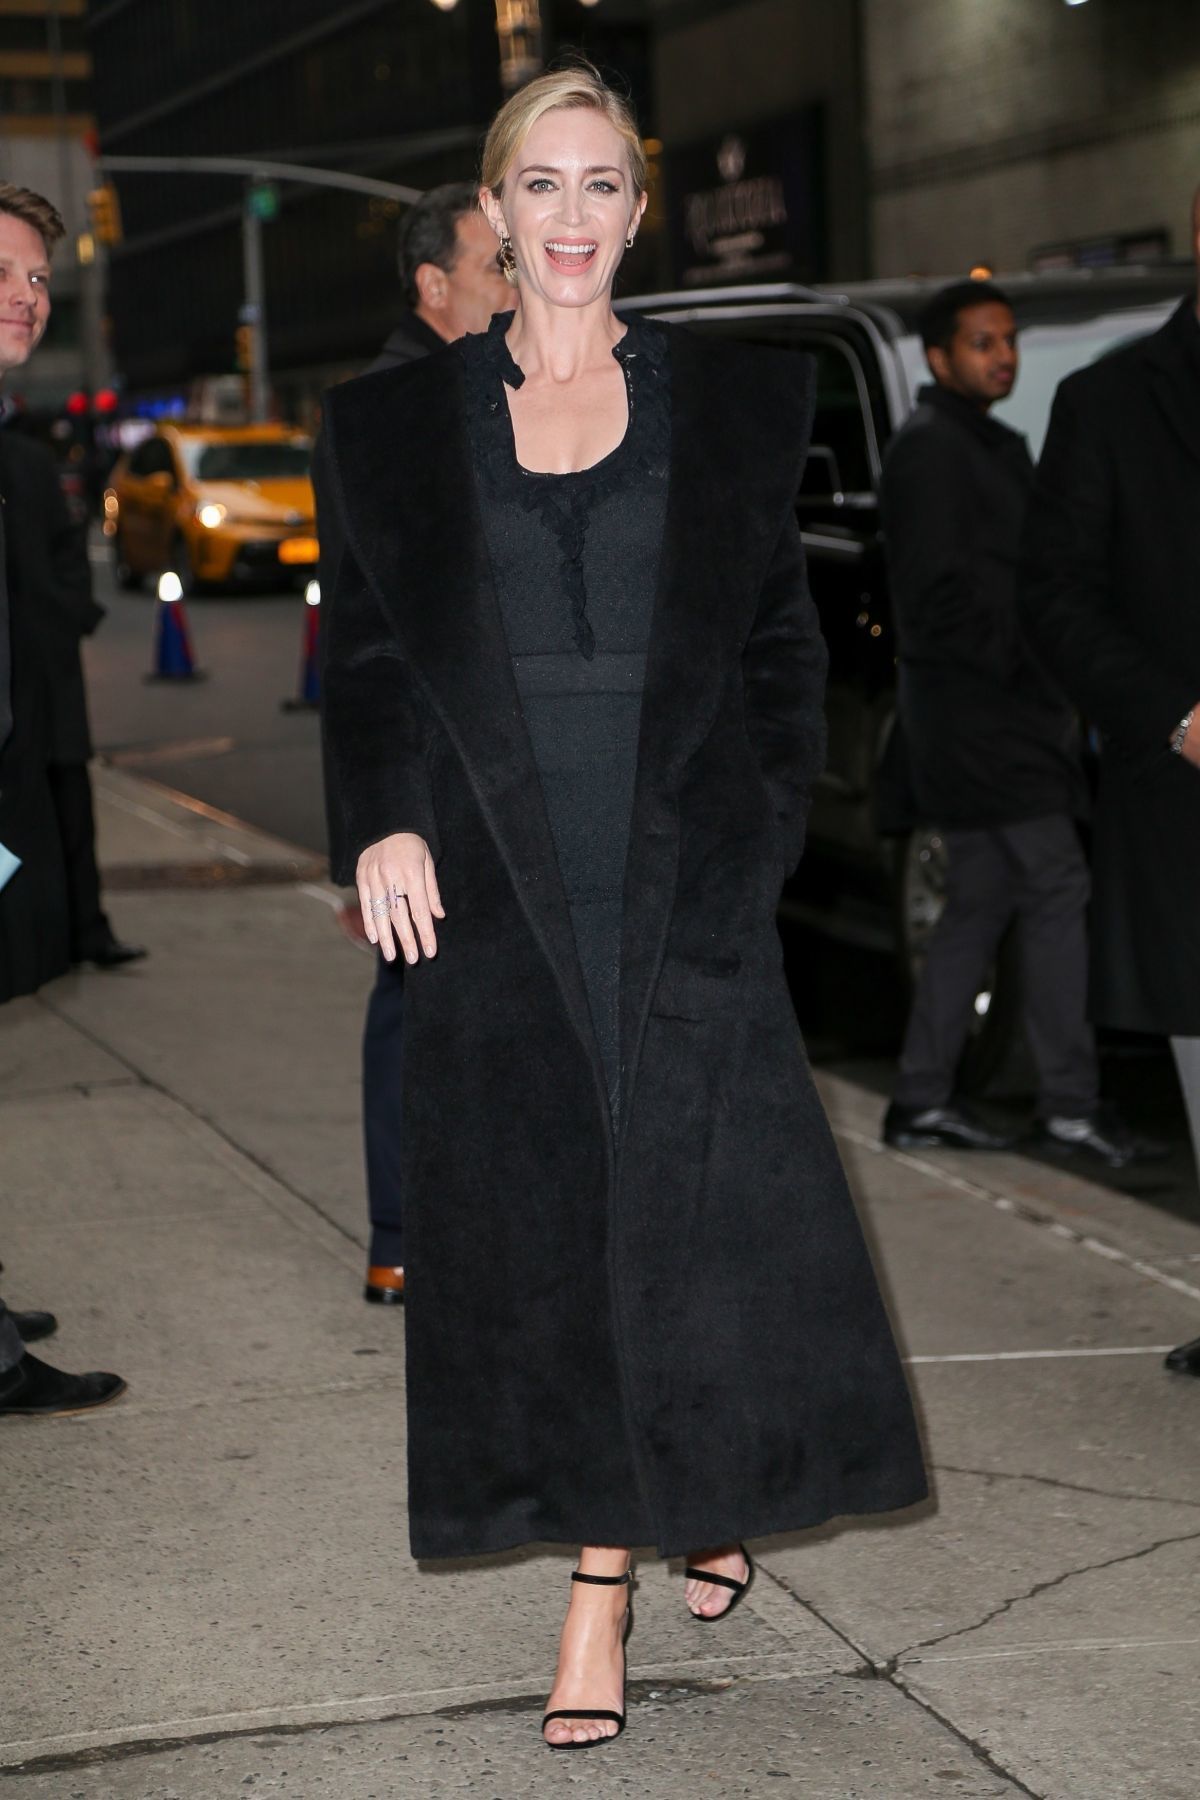 emily-blunt-arriving-at-the-late-show-with-stephen-colbert-in-nyc-32918-7.jpeg